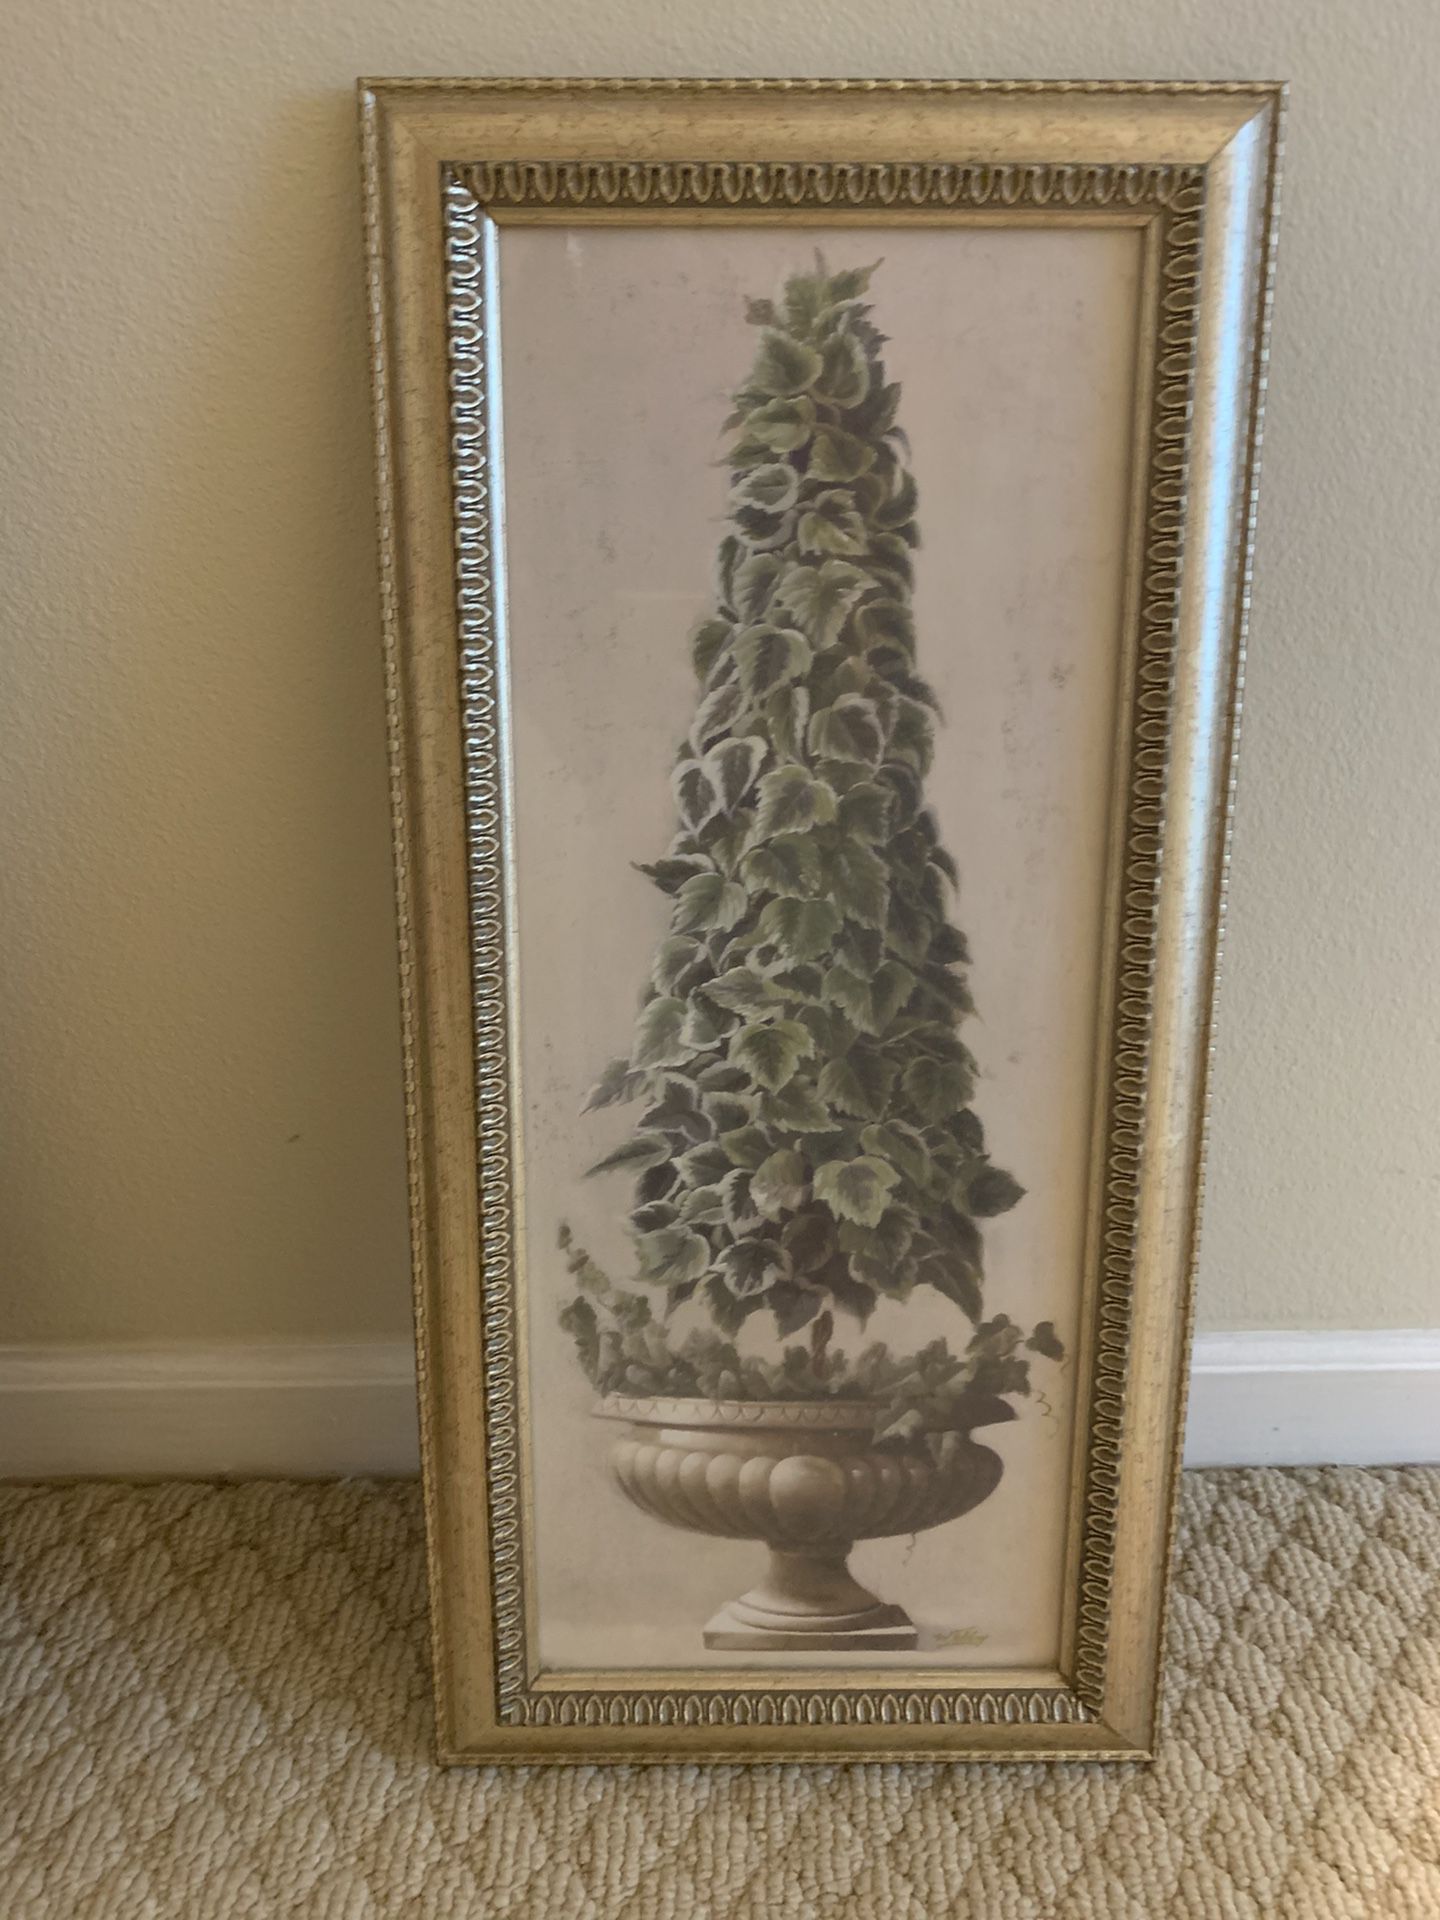 Gorgeous Topiary wall art in ornate frame